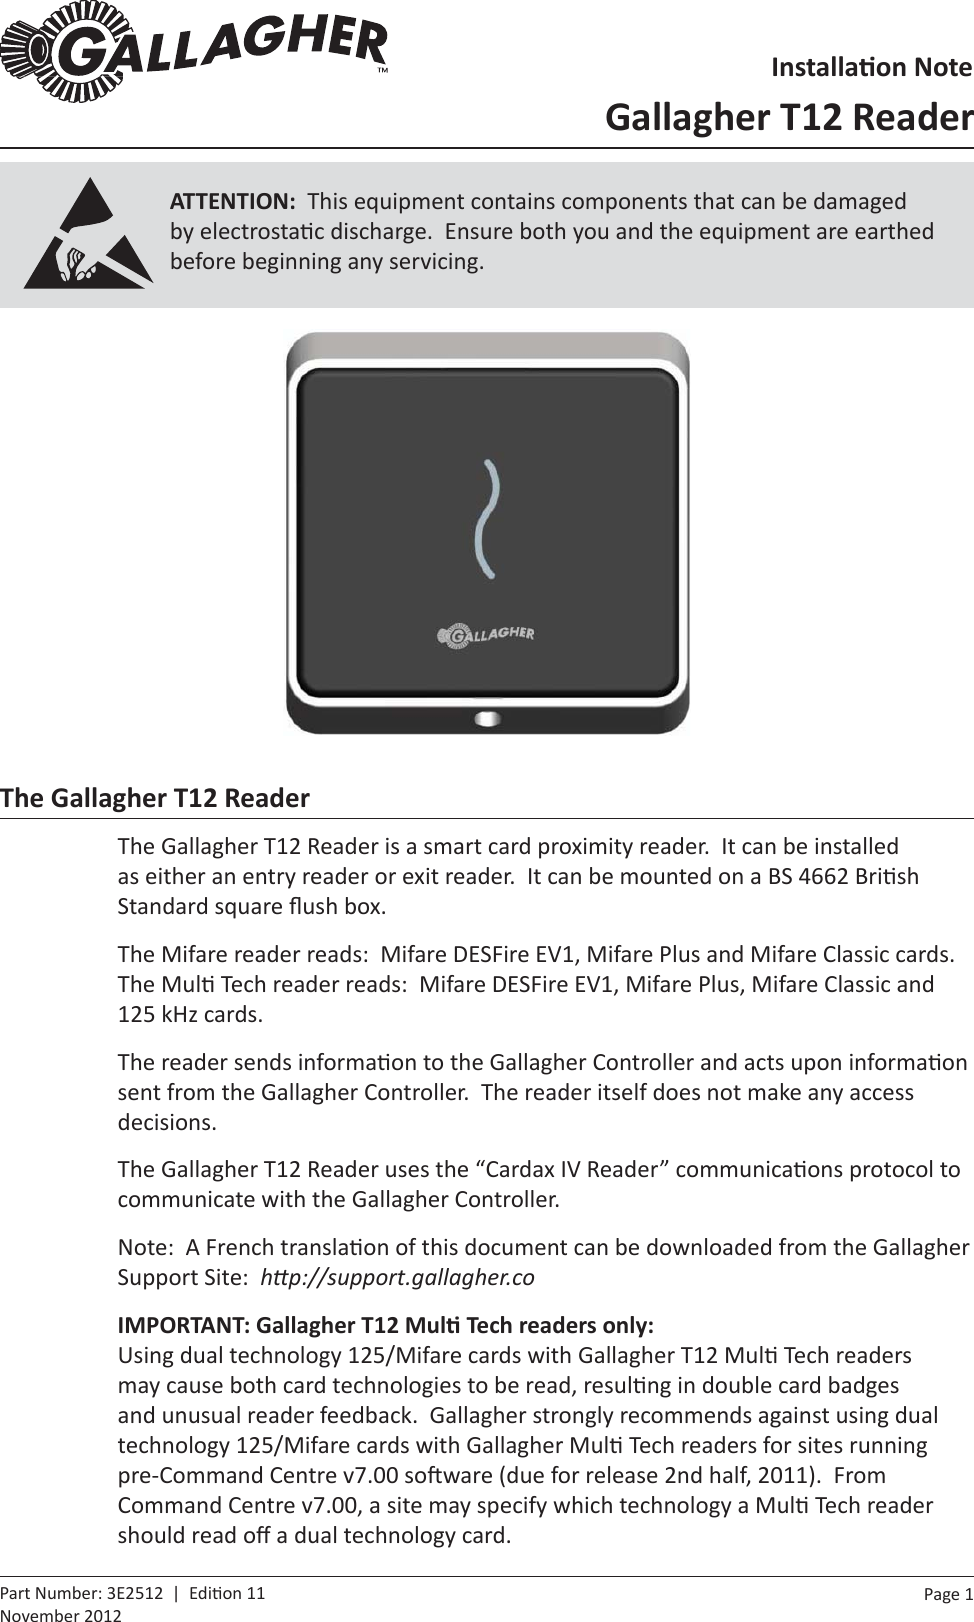 Page  1   Part Number: 3E2512  |  Edi on 11November 2012The Gallagher T12 ReaderThe Gallagher T12 Reader is a smart card proximity reader.  It can be installed as either an entry reader or exit reader.  It can be mounted on a BS 4662 Bri sh Standard square ﬂ ush box.The Mifare reader reads:  Mifare DESFire EV1, Mifare Plus and Mifare Classic cards.  The Mul  Tech reader reads:  Mifare DESFire EV1, Mifare Plus, Mifare Classic and 125 kHz cards.The reader sends informa on to the Gallagher Controller and acts upon informa on sent from the Gallagher Controller.  The reader itself does not make any access decisions.The Gallagher T12 Reader uses the “Cardax IV Reader” communica ons protocol to communicate with the Gallagher Controller.Note:  A French transla on of this document can be downloaded from the Gallagher Support Site:  hƩ p://support.gallagher.coIMPORTANT: Gallagher T12 MulƟ  Tech readers only:Using dual technology 125/Mifare cards with Gallagher T12 Mul  Tech readers may cause both card technologies to be read, resul ng in double card badges and unusual reader feedback.  Gallagher strongly recommends against using dual technology 125/Mifare cards with Gallagher Mul  Tech readers for sites running pre-Command Centre v7.00 so ware (due for release 2nd half, 2011).  From Command Centre v7.00, a site may specify which technology a Mul  Tech reader should read oﬀ  a dual technology card.InstallaƟ on NoteGallagher T12 ReaderATTENTION:  This equipment contains components that can be damaged by electrosta c discharge.  Ensure both you and the equipment are earthed before beginning any servicing.